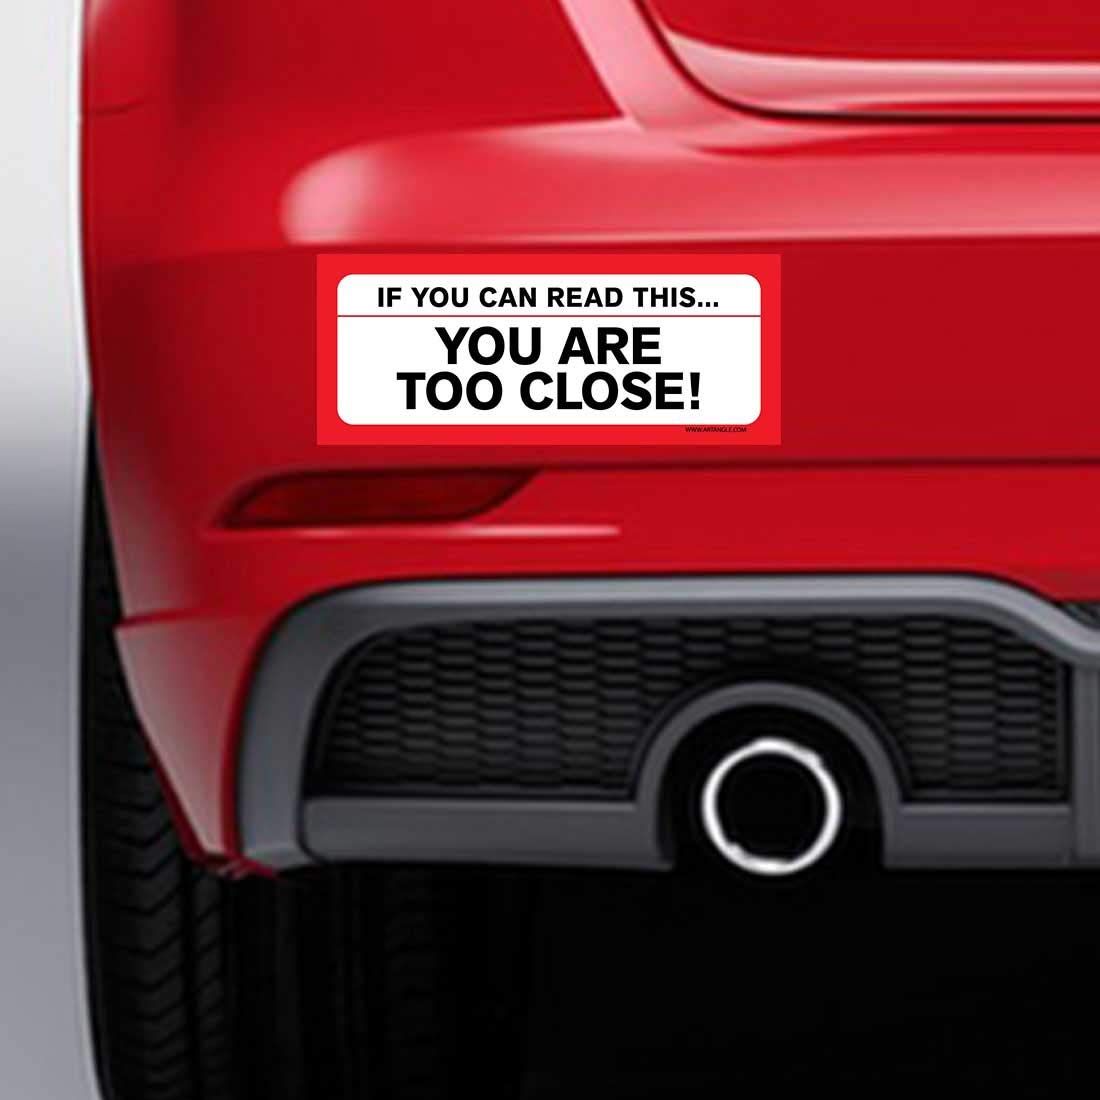 From Boring to Eye-Catching: The Transformation of Your Car with Bumper Stickers